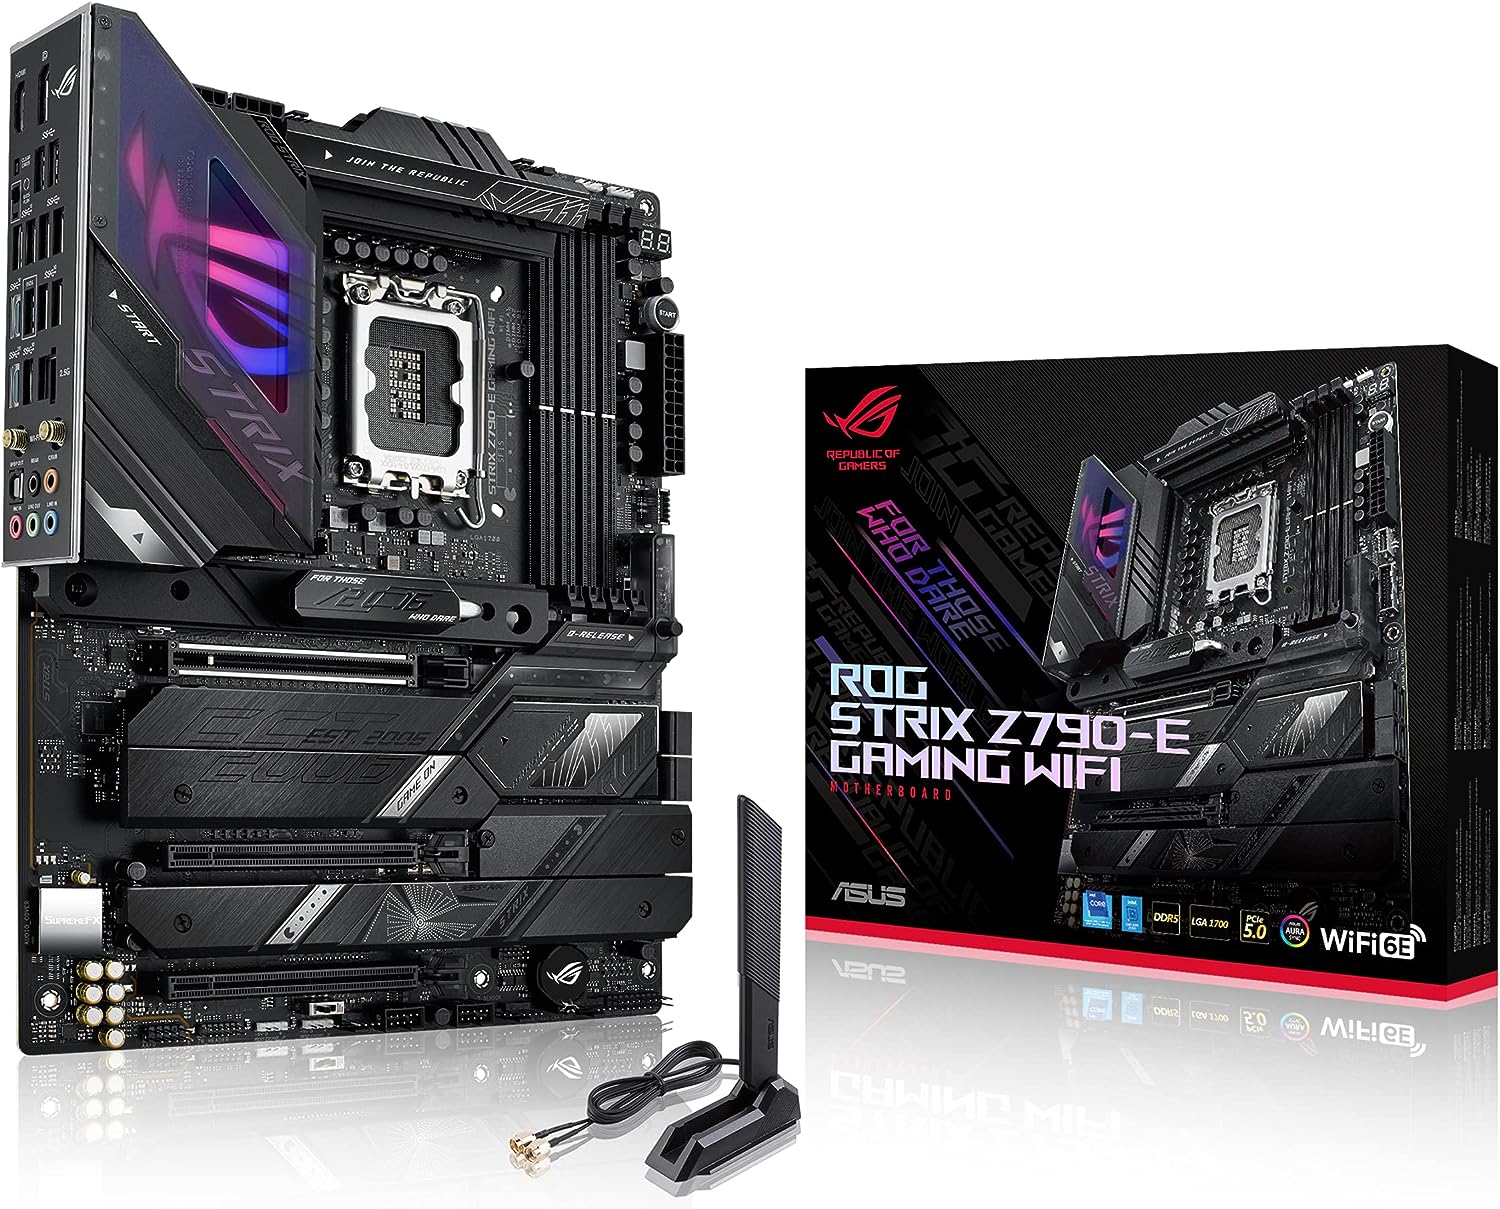 Unveiling the ASUS ROG Strix Z790-E Gaming Motherboard: A Gamer’s Dream or Just Hype?